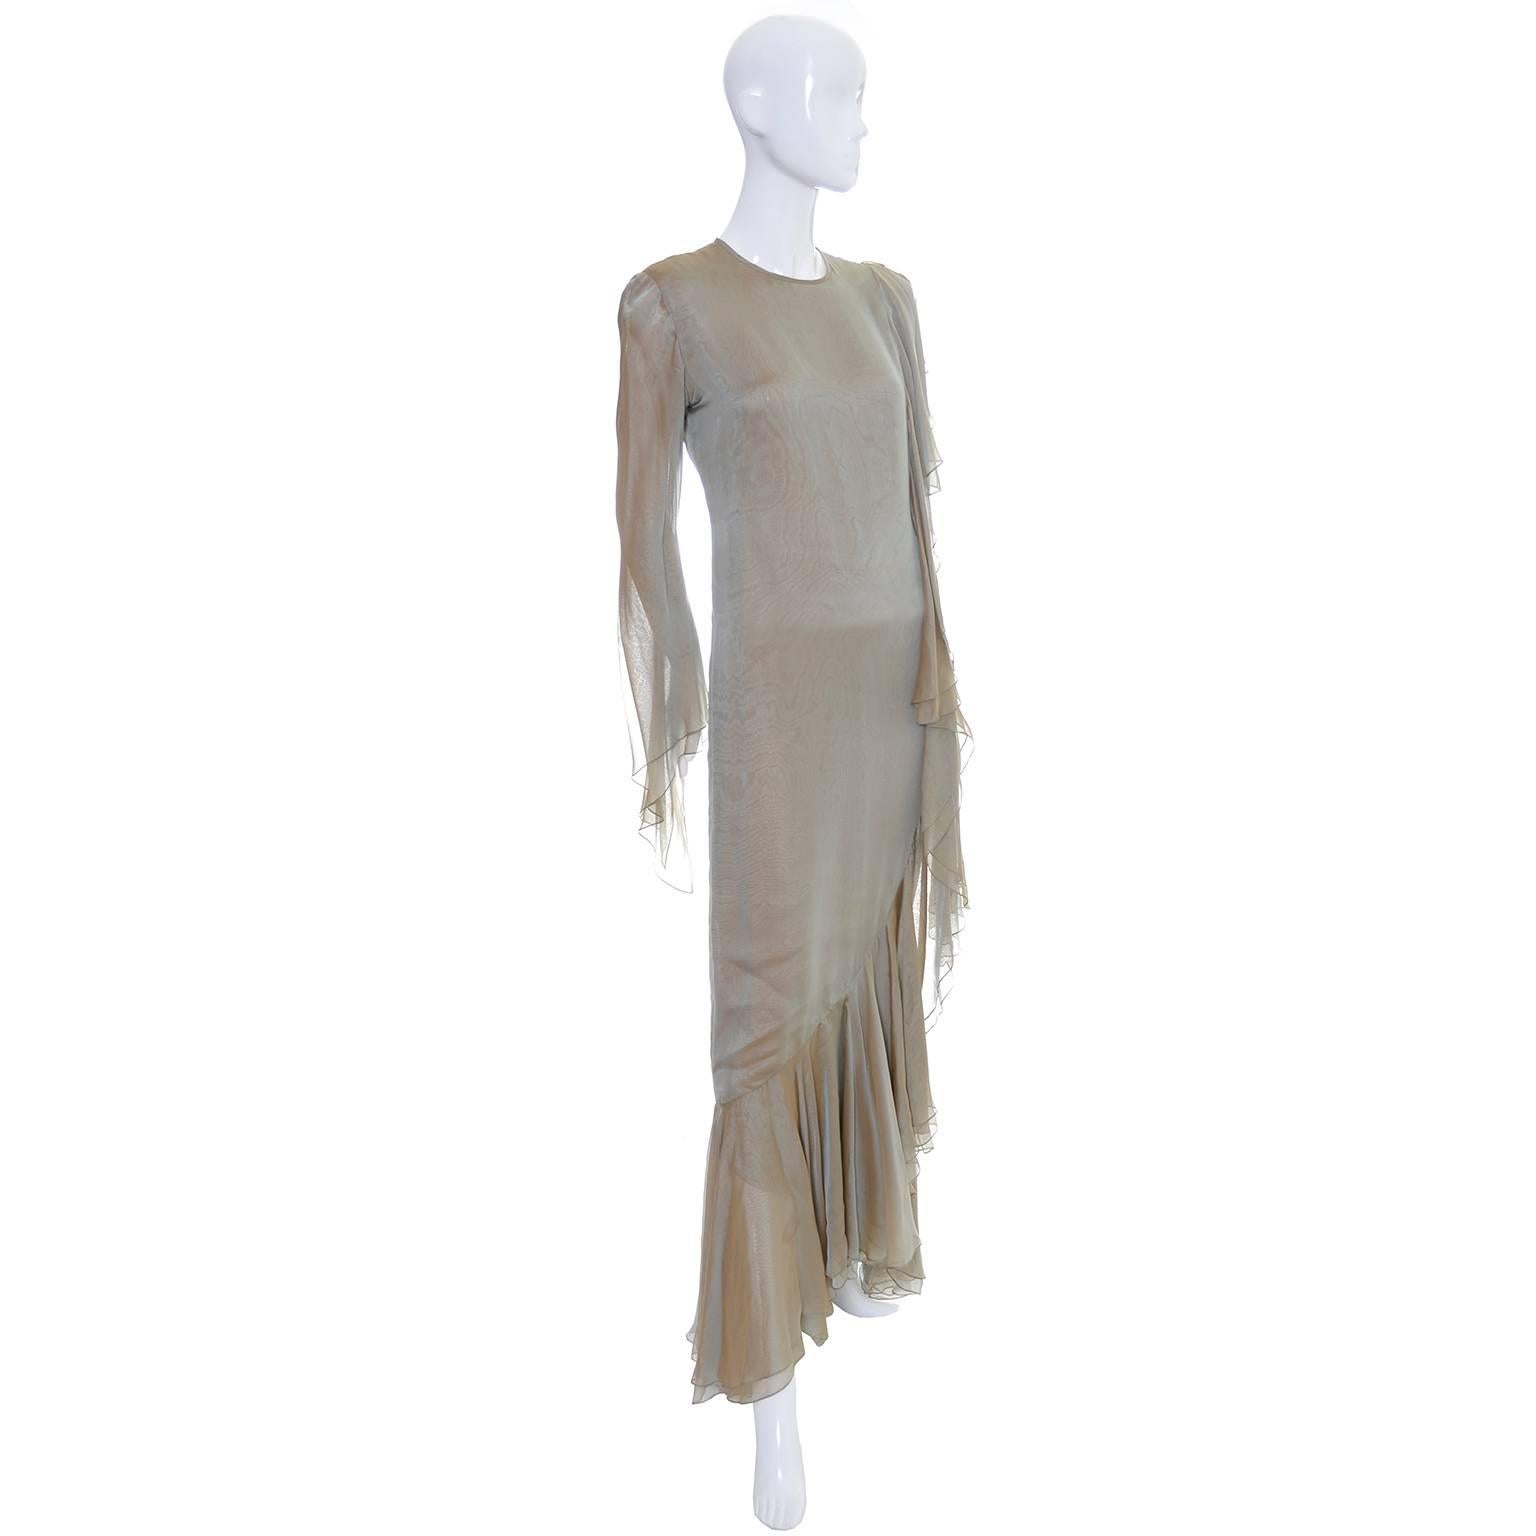 1993 Bill Blass Vintage Runway Dress in Iridescent Sage Green Silk w/ Ruffles  In Excellent Condition For Sale In Portland, OR